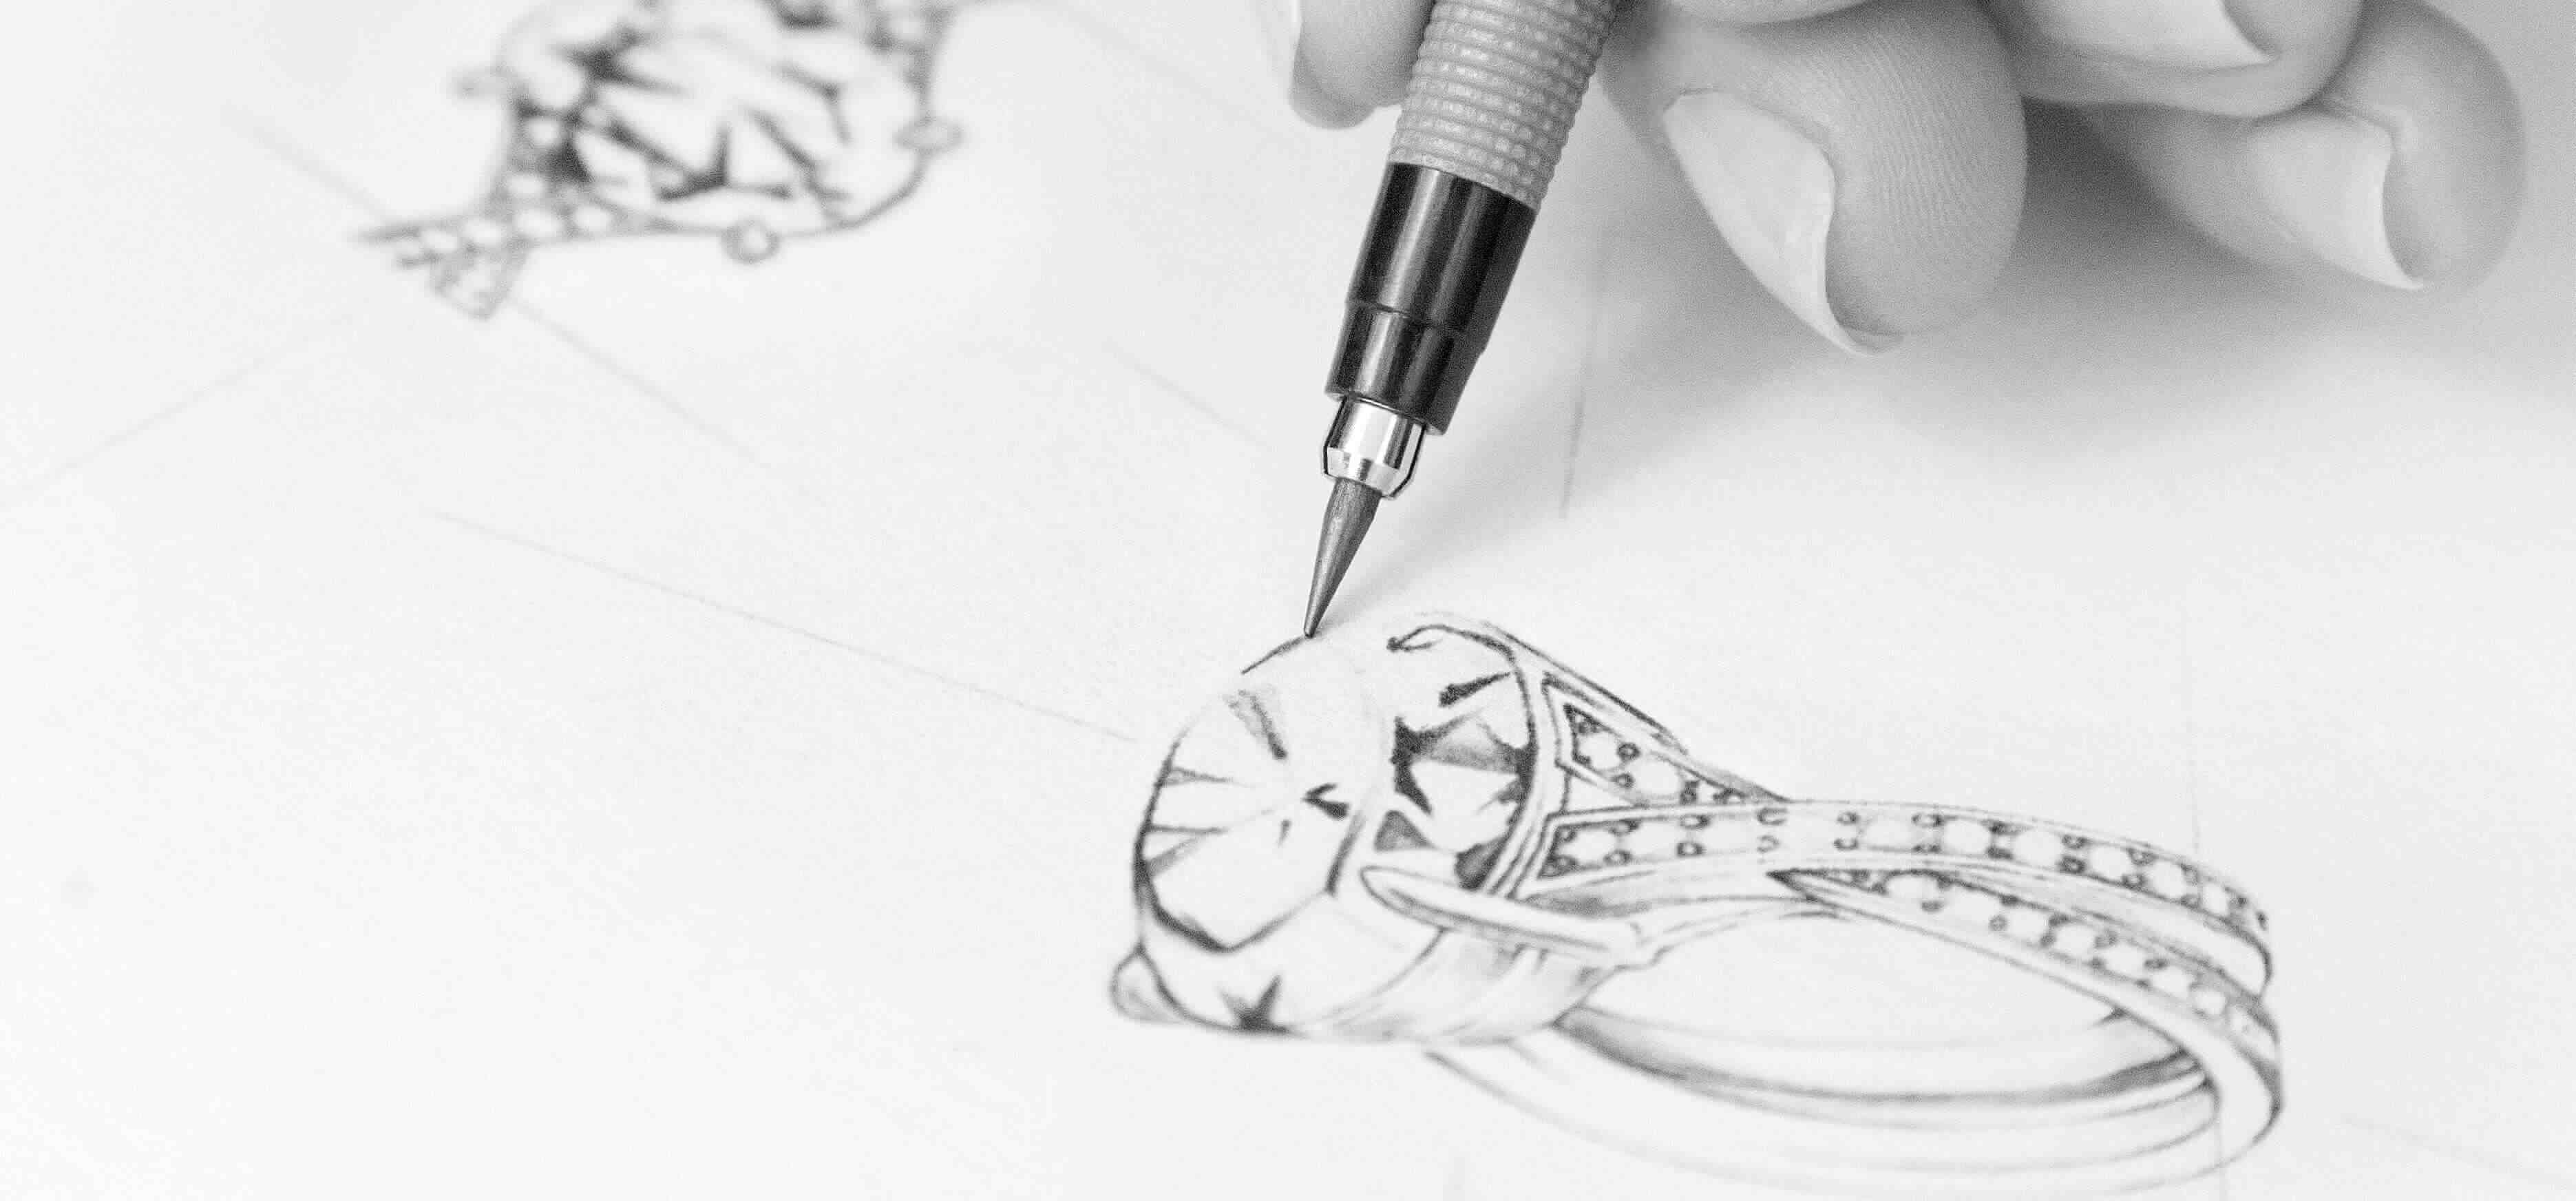 A design sketching jewellery